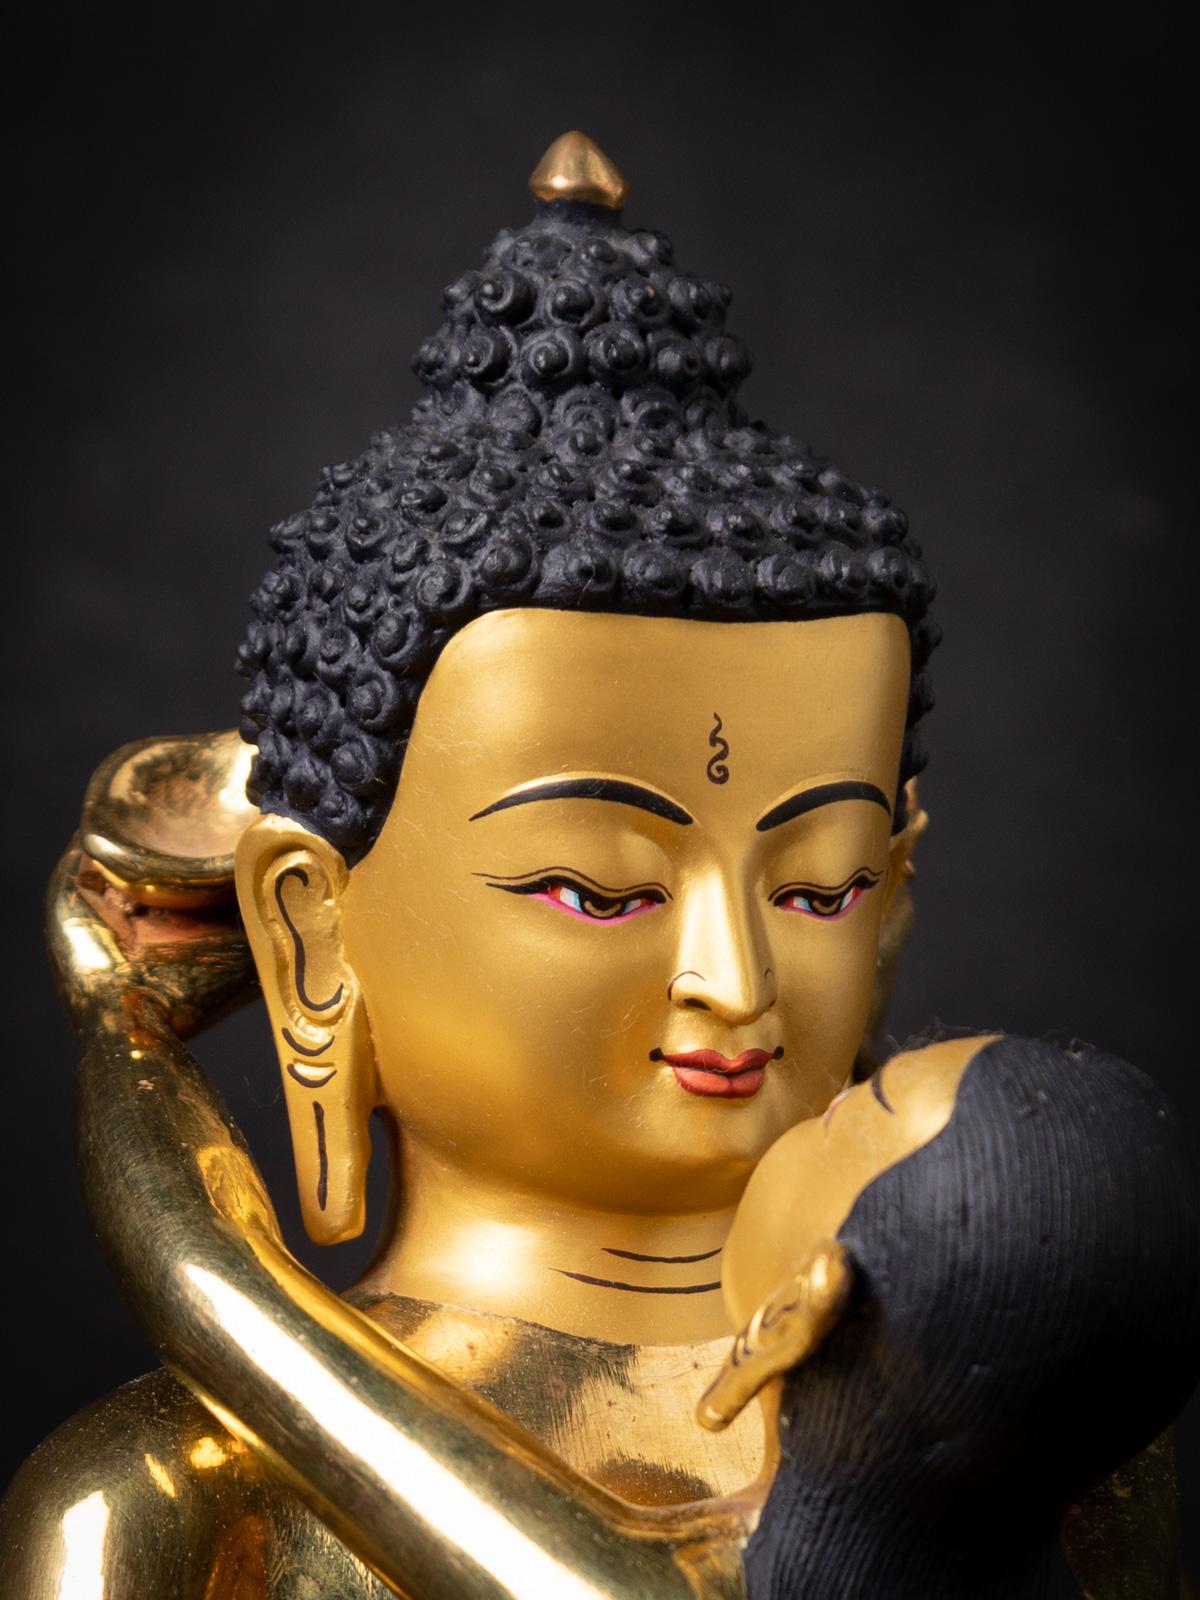 The old bronze Samantabhadra statue from Nepal is a captivating and spiritually meaningful artifact. Crafted from bronze and adorned with fire gilding in 24-karat gold, this statue stands at 29 cm in height and measures 19.5 cm in width and 17.5 cm